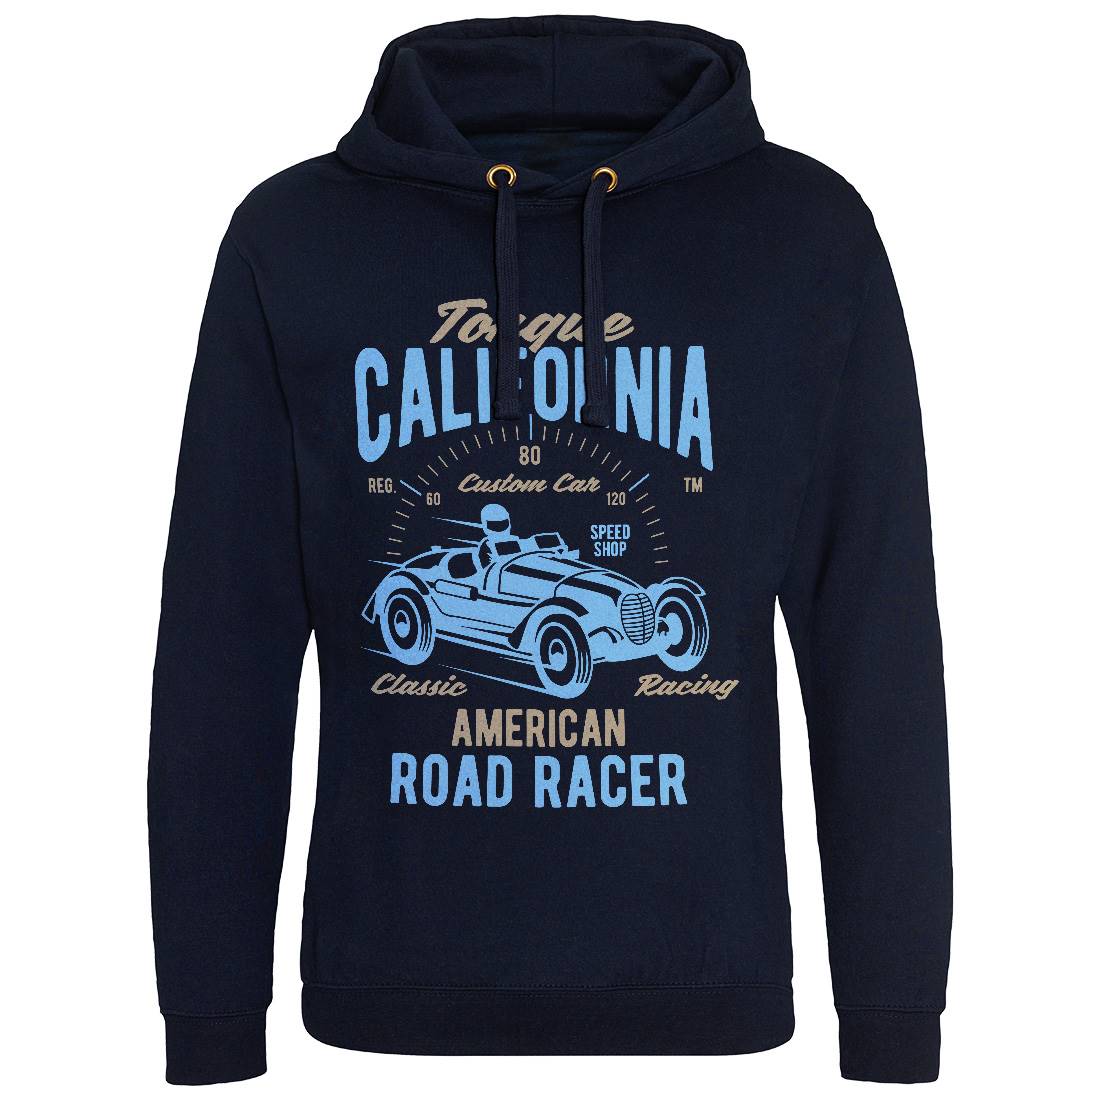 Torque California Mens Hoodie Without Pocket Cars B468